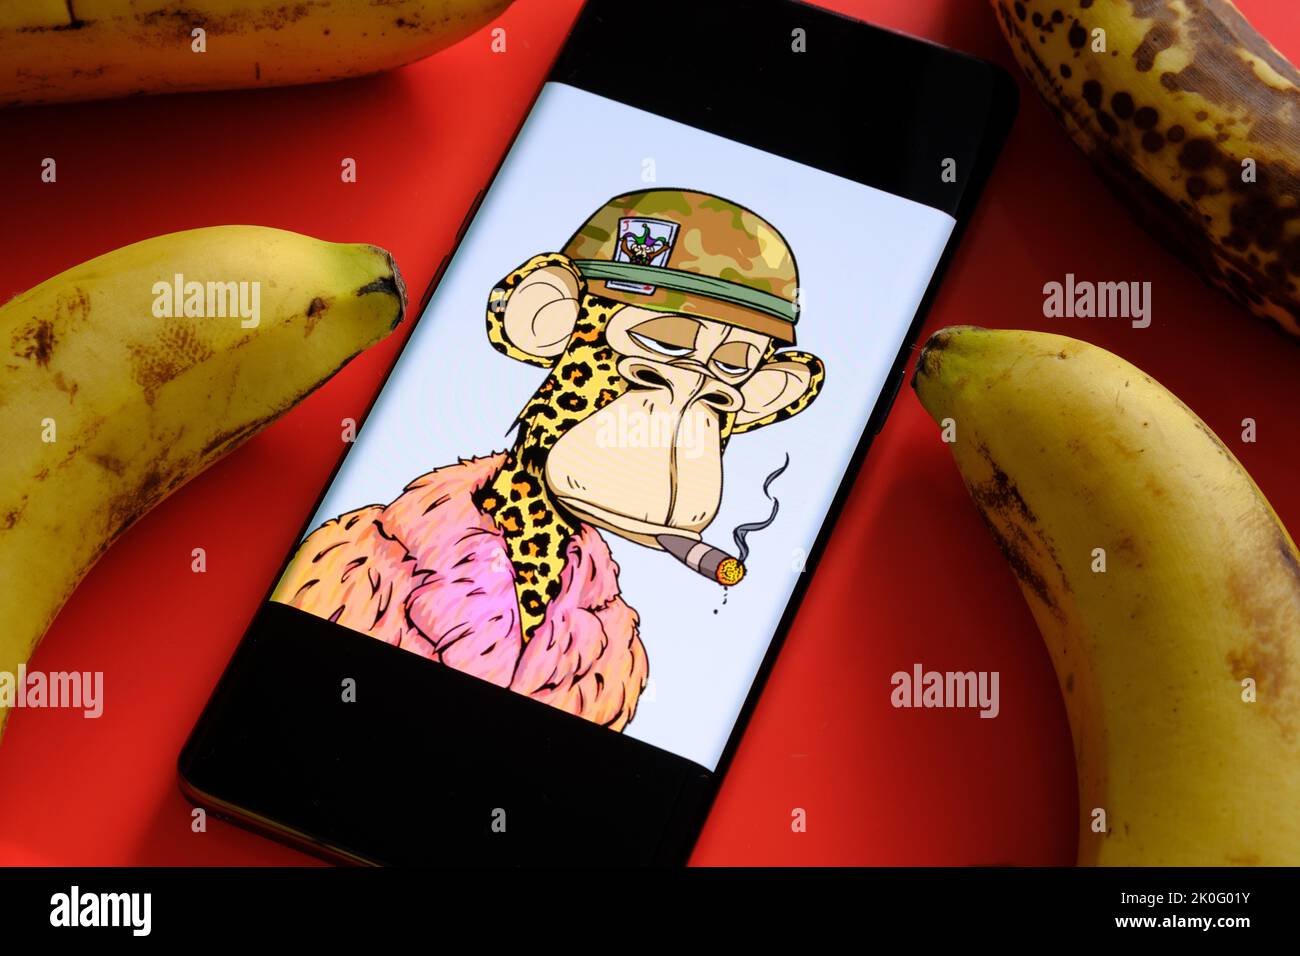 Bored Ape #6723 NFT seen on the smartphone screen surrounded by rotten bananas. Snoop Dogg’s NFT. Stafford, United Kingdom, September 11, 2022. Stock Photo